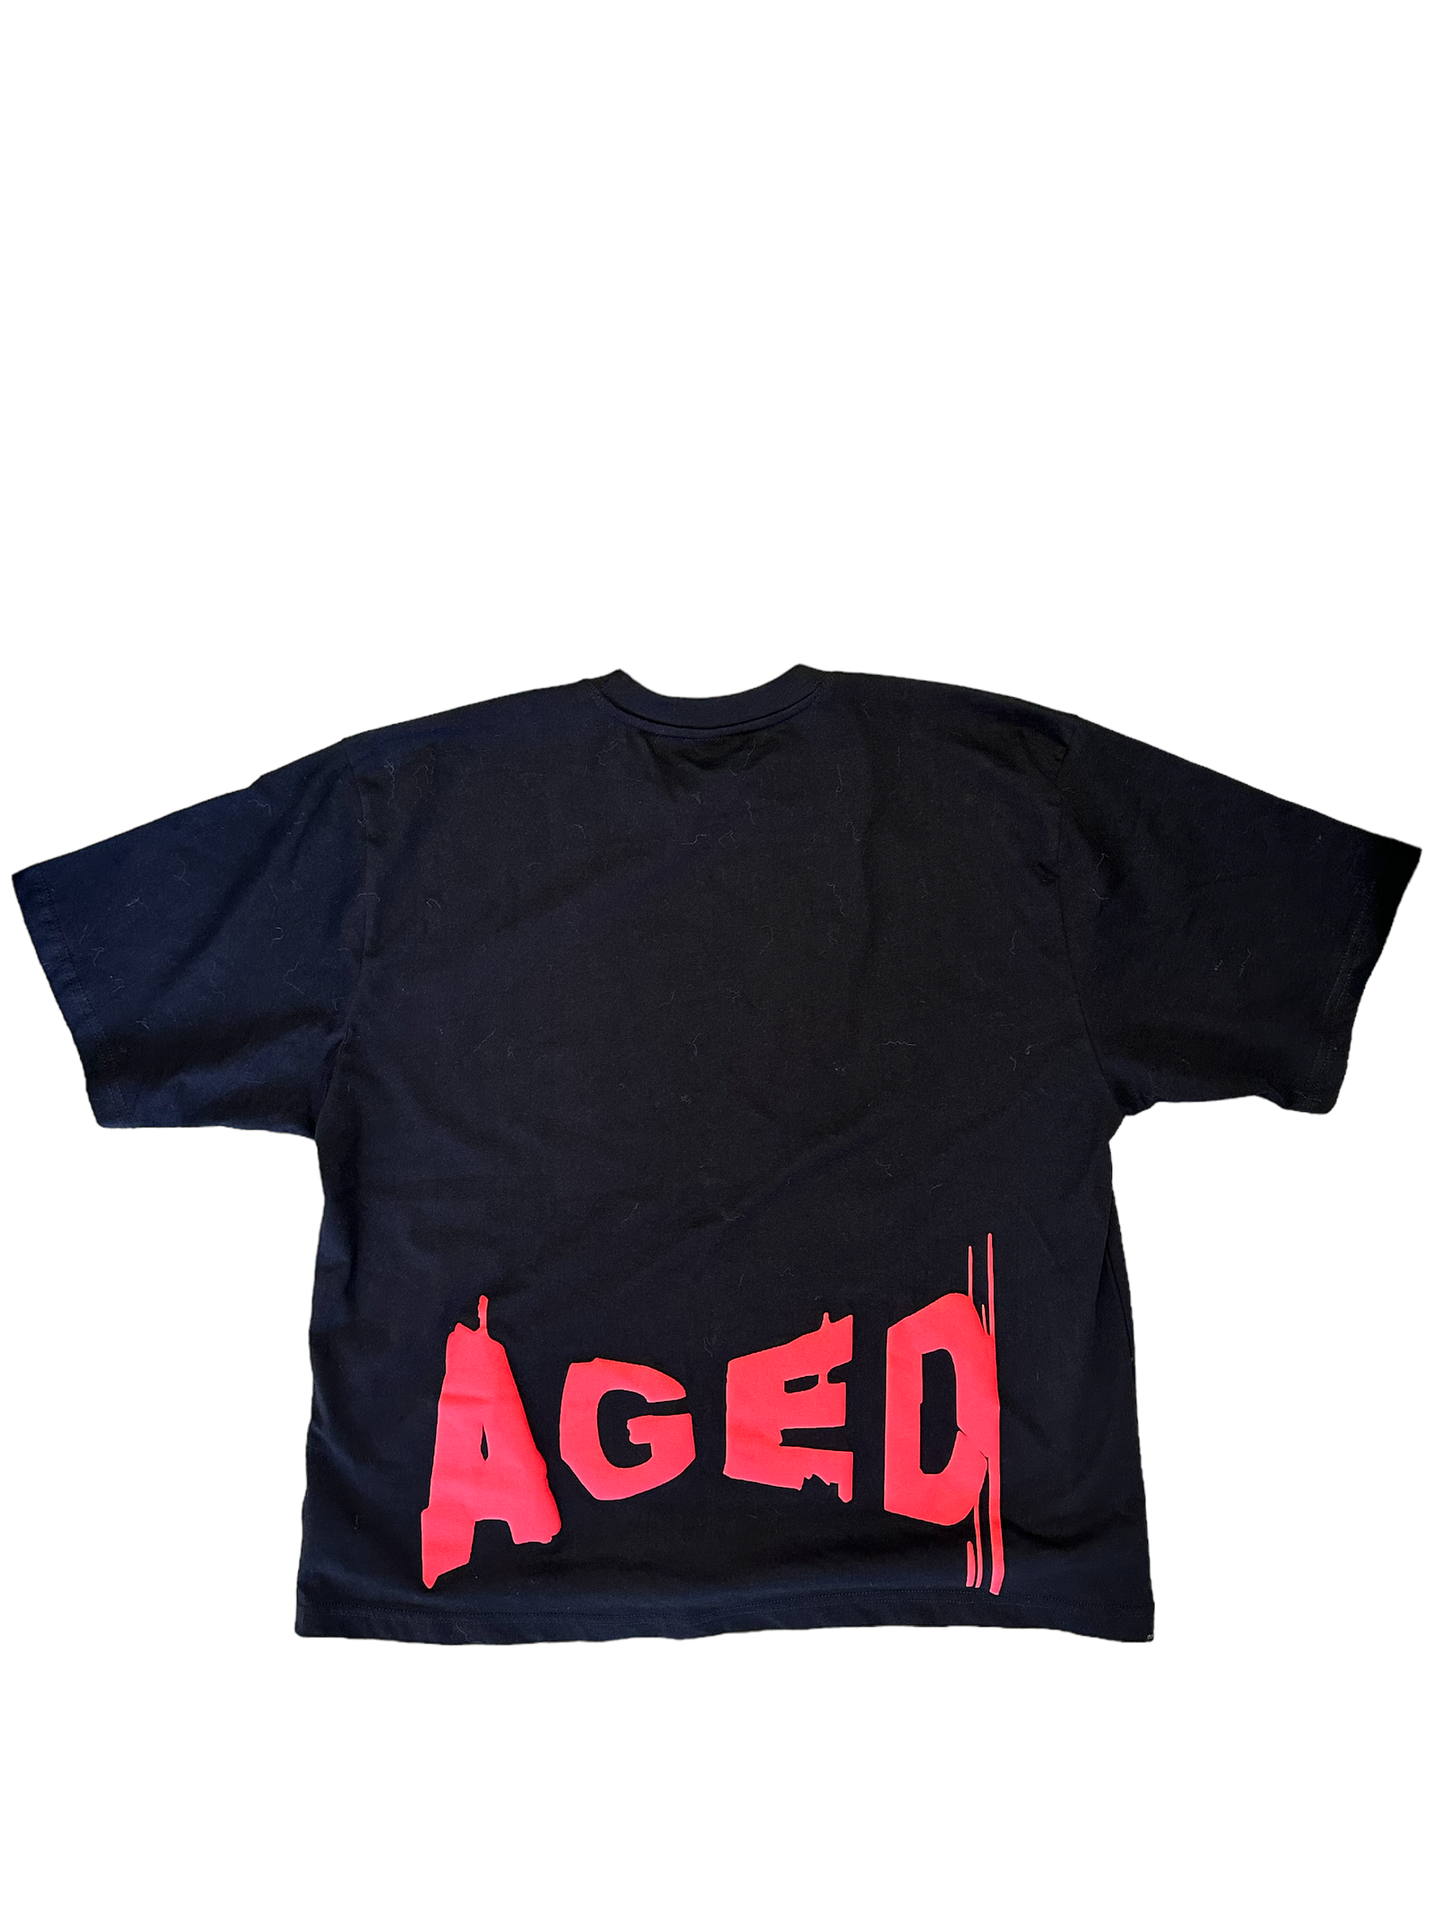 AIM FOR AGED OVERSIZED TEE